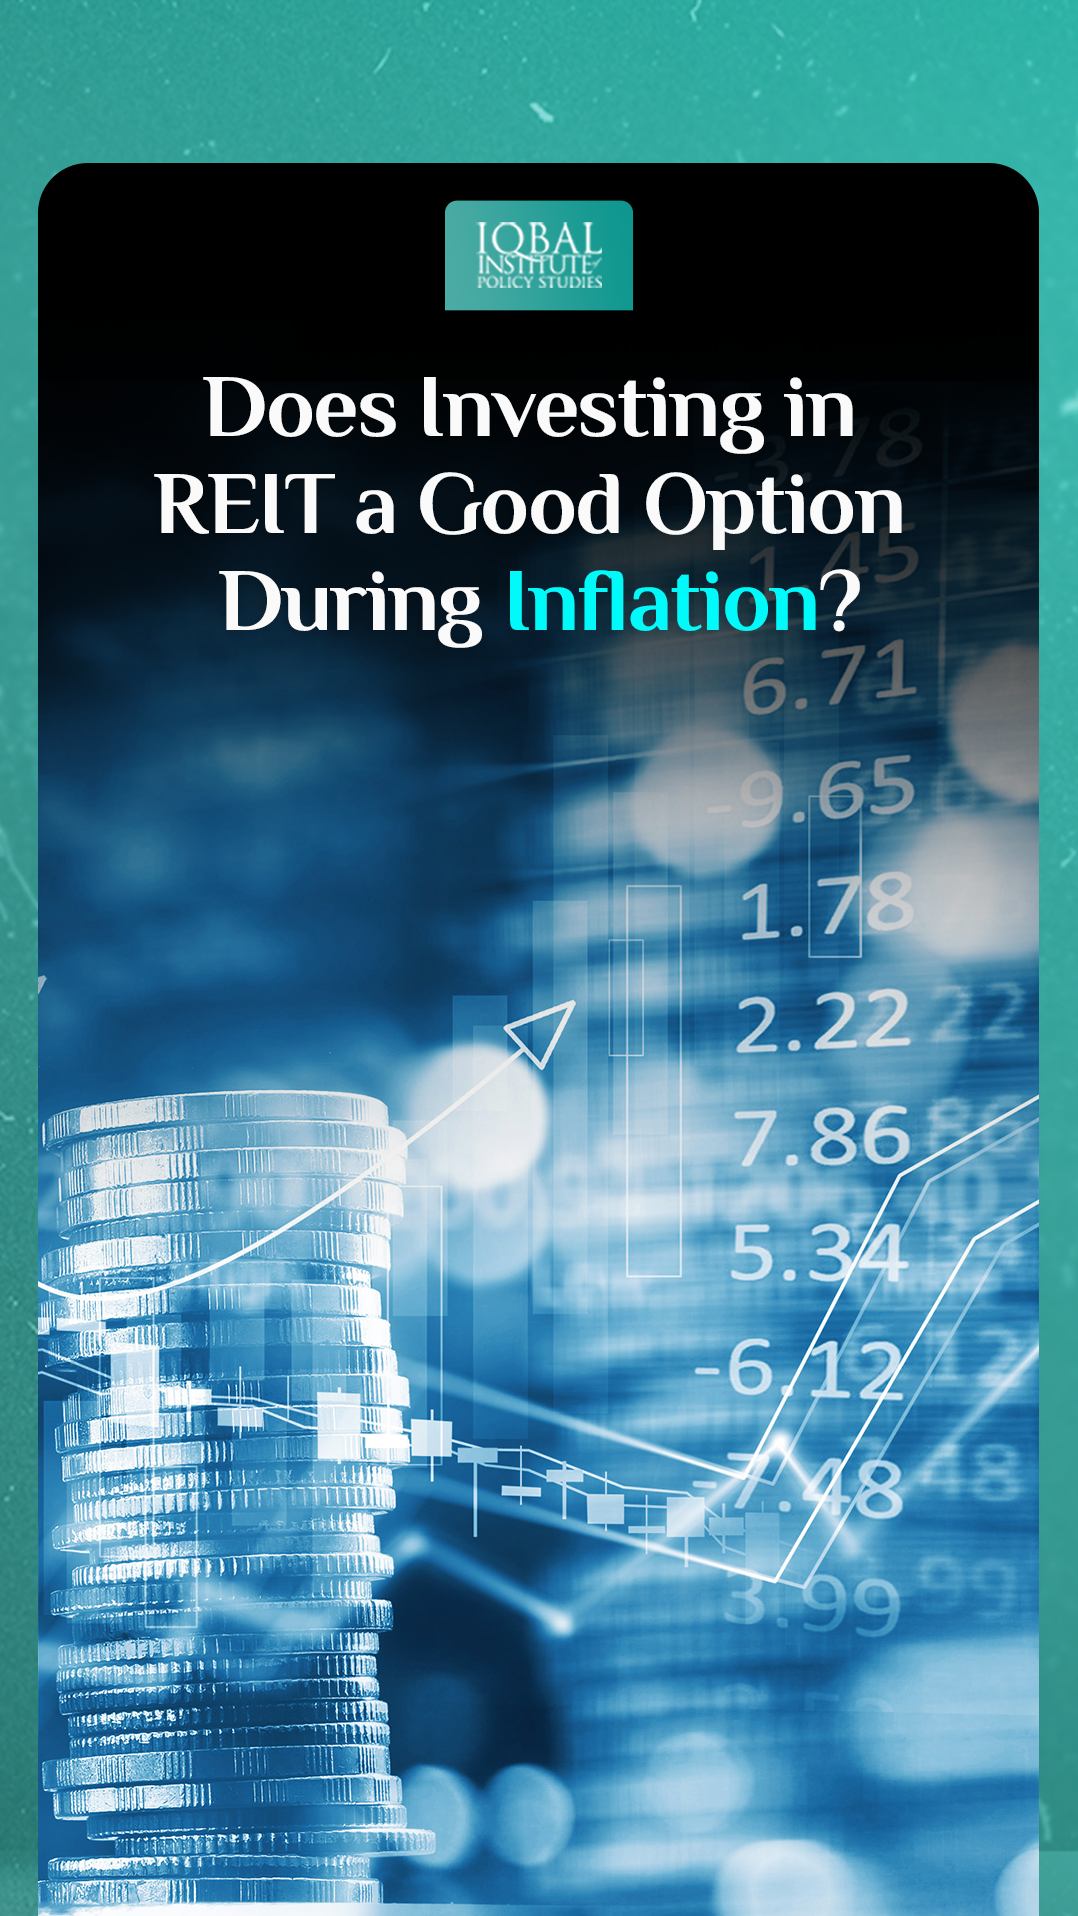 Does Investing in REIT a Good Option During Inflation?